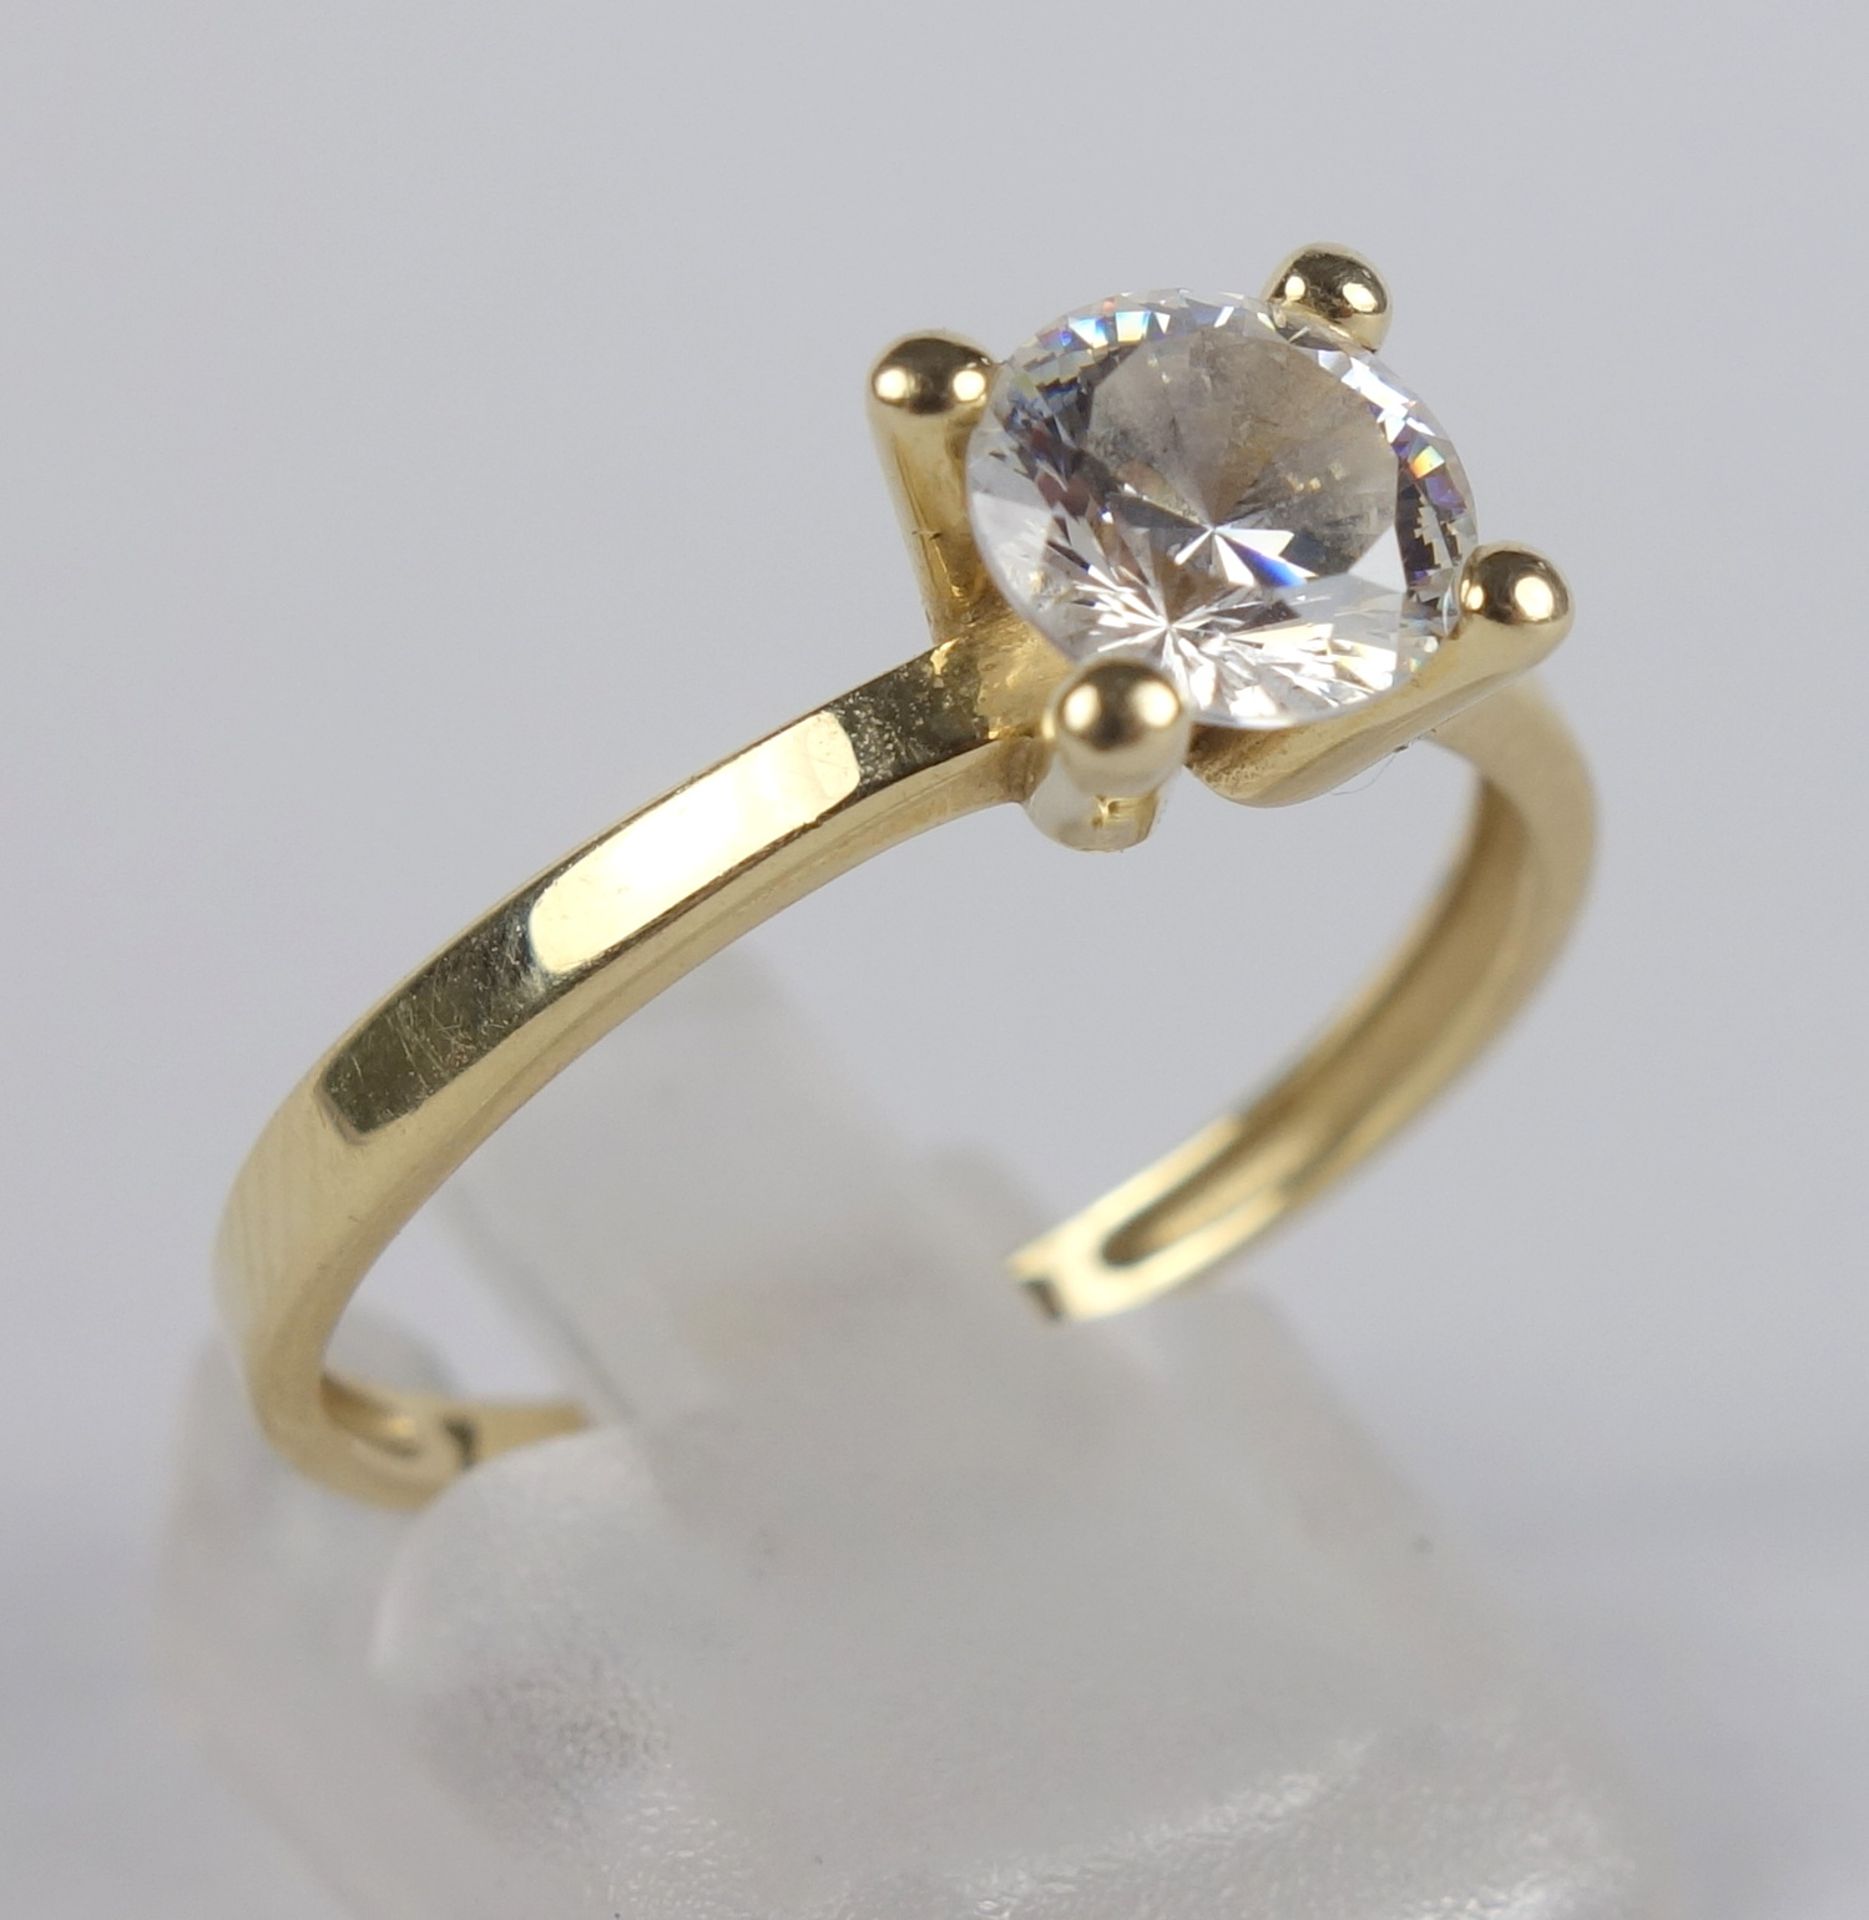 Ring with Swarovski solitaire, 14K gold, weight 2.44g, plus magnifying glass